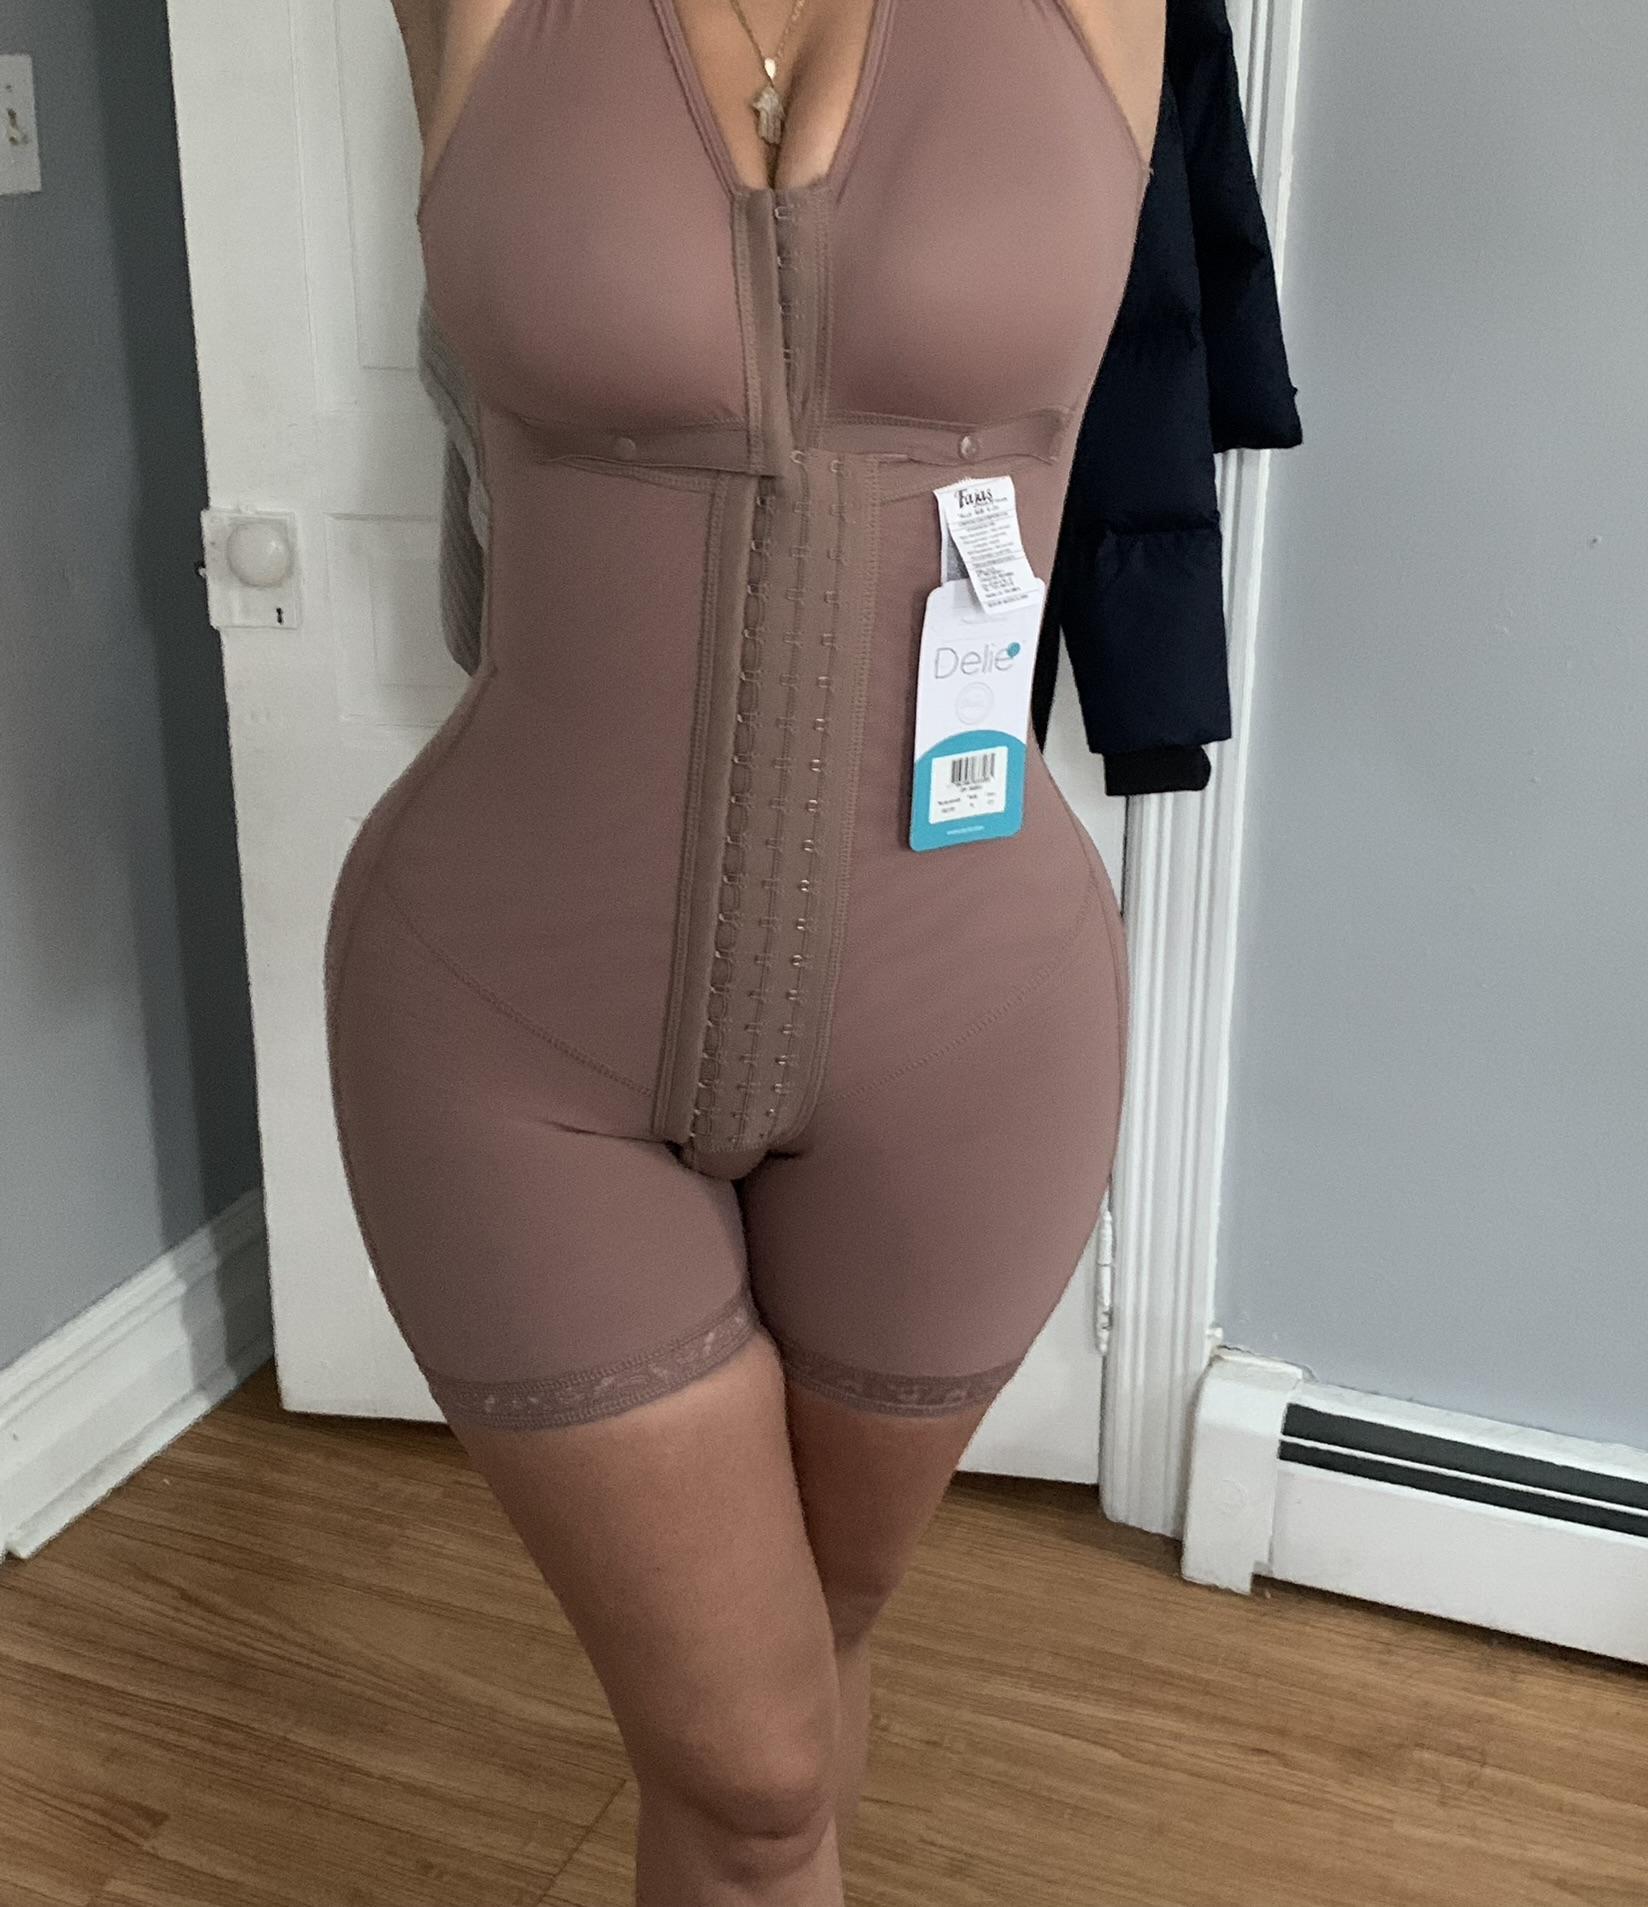 What are Colombian Fajas? - Shapewear USA